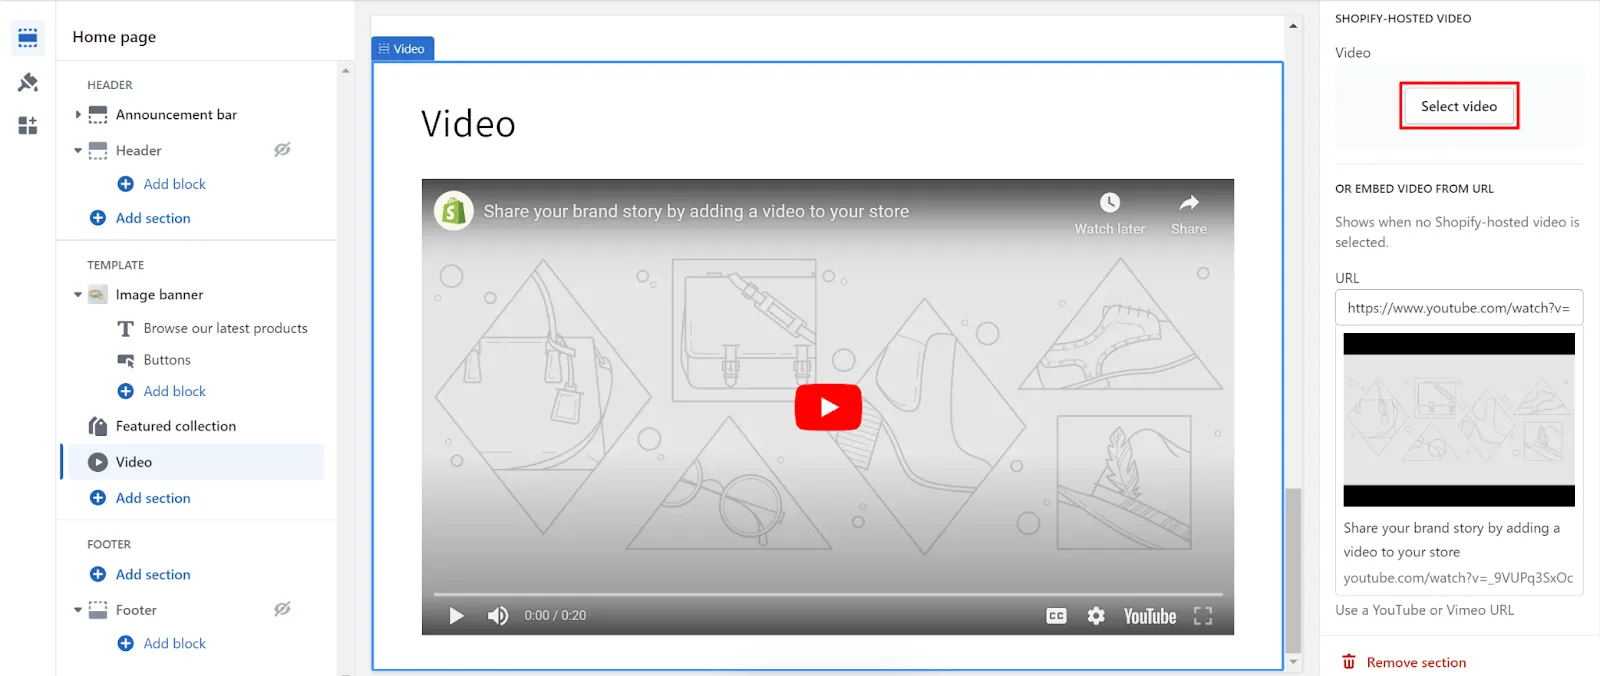 How to add video to Shopify homepage by uploading your own video